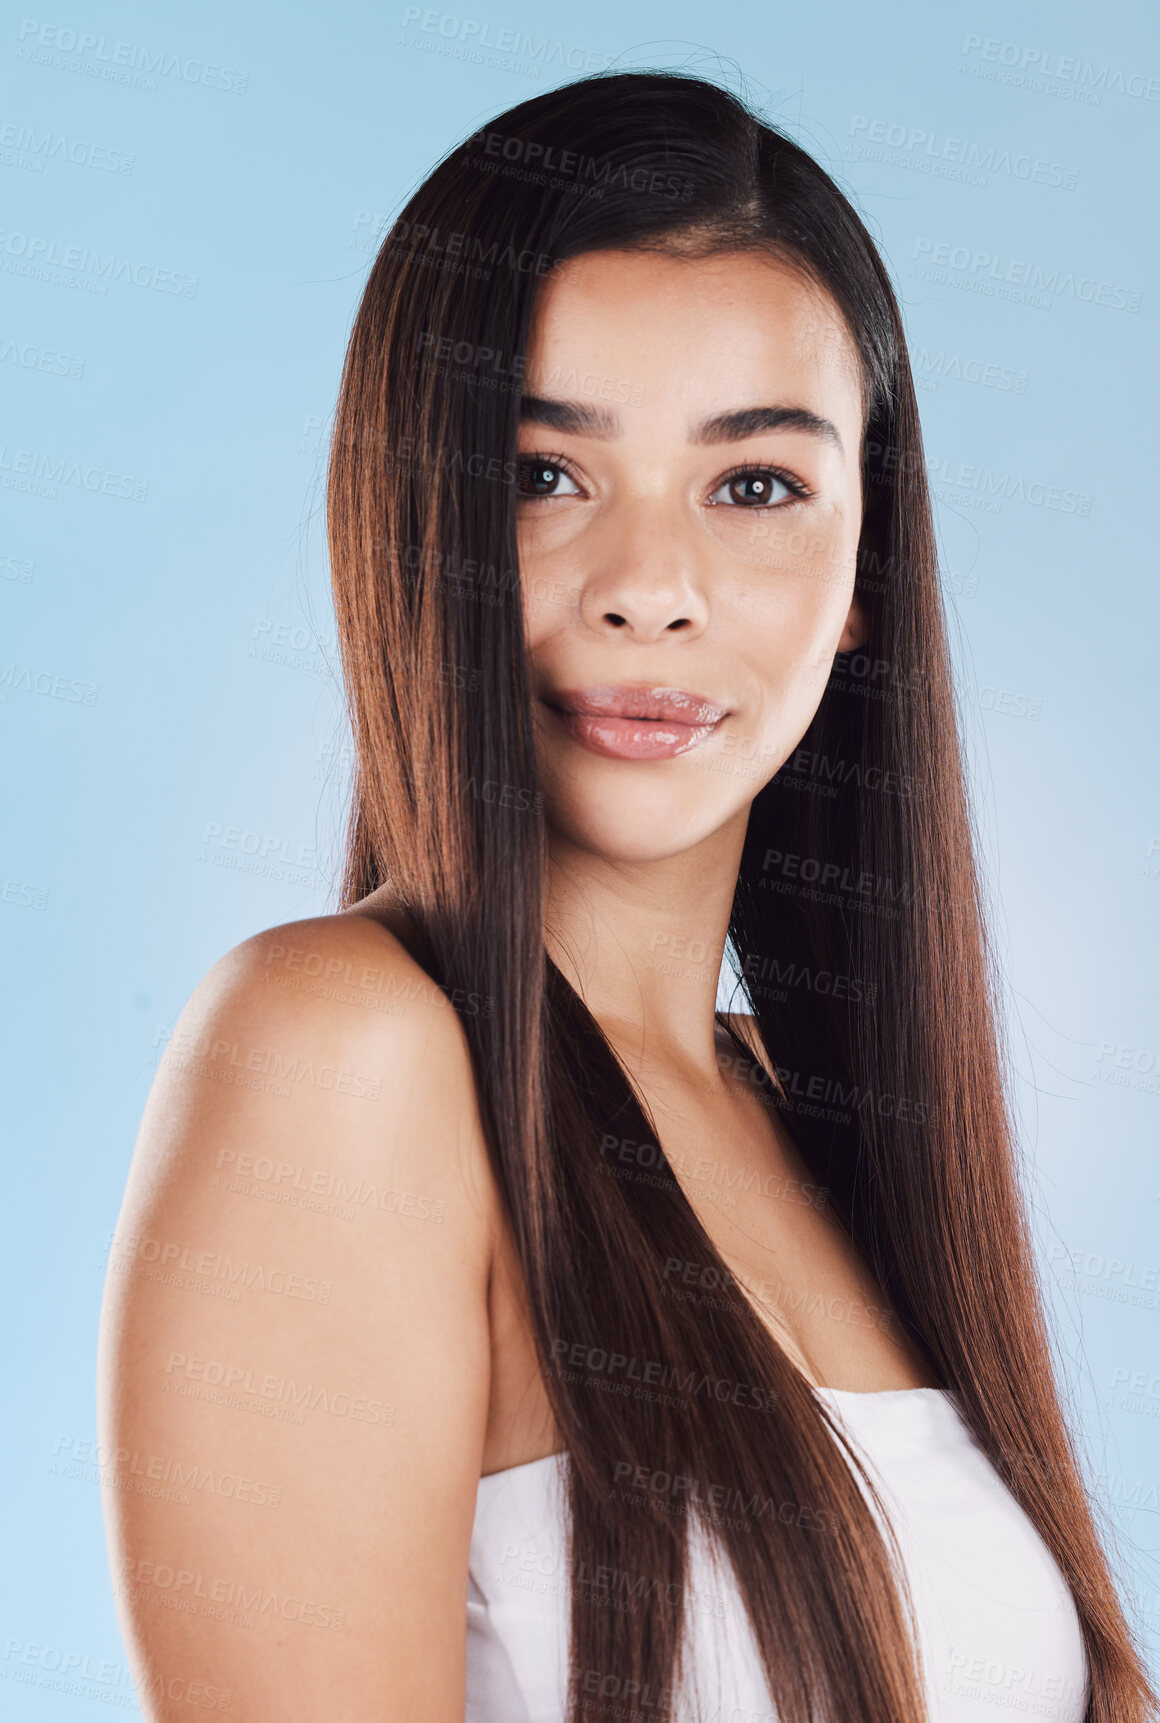 Buy stock photo Portrait of one beautiful young hispanic woman with healthy skin and sleek long hair posing against a blue studio background. Mixed race model with flawless complexion and natural beauty